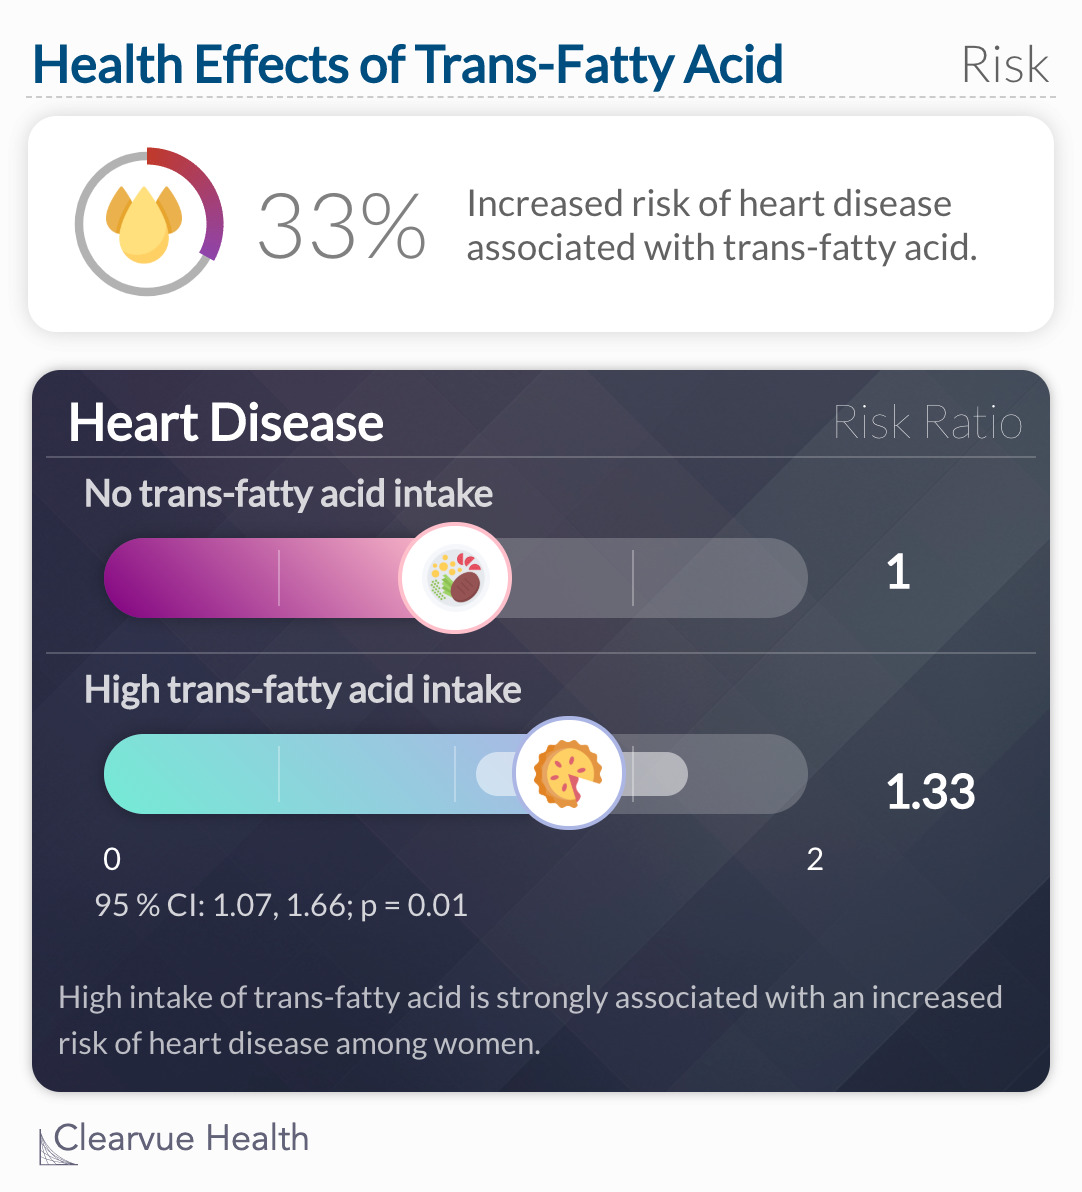 High intake of trans-fatty acid is strongly associated with an increased risk of heart disease. 